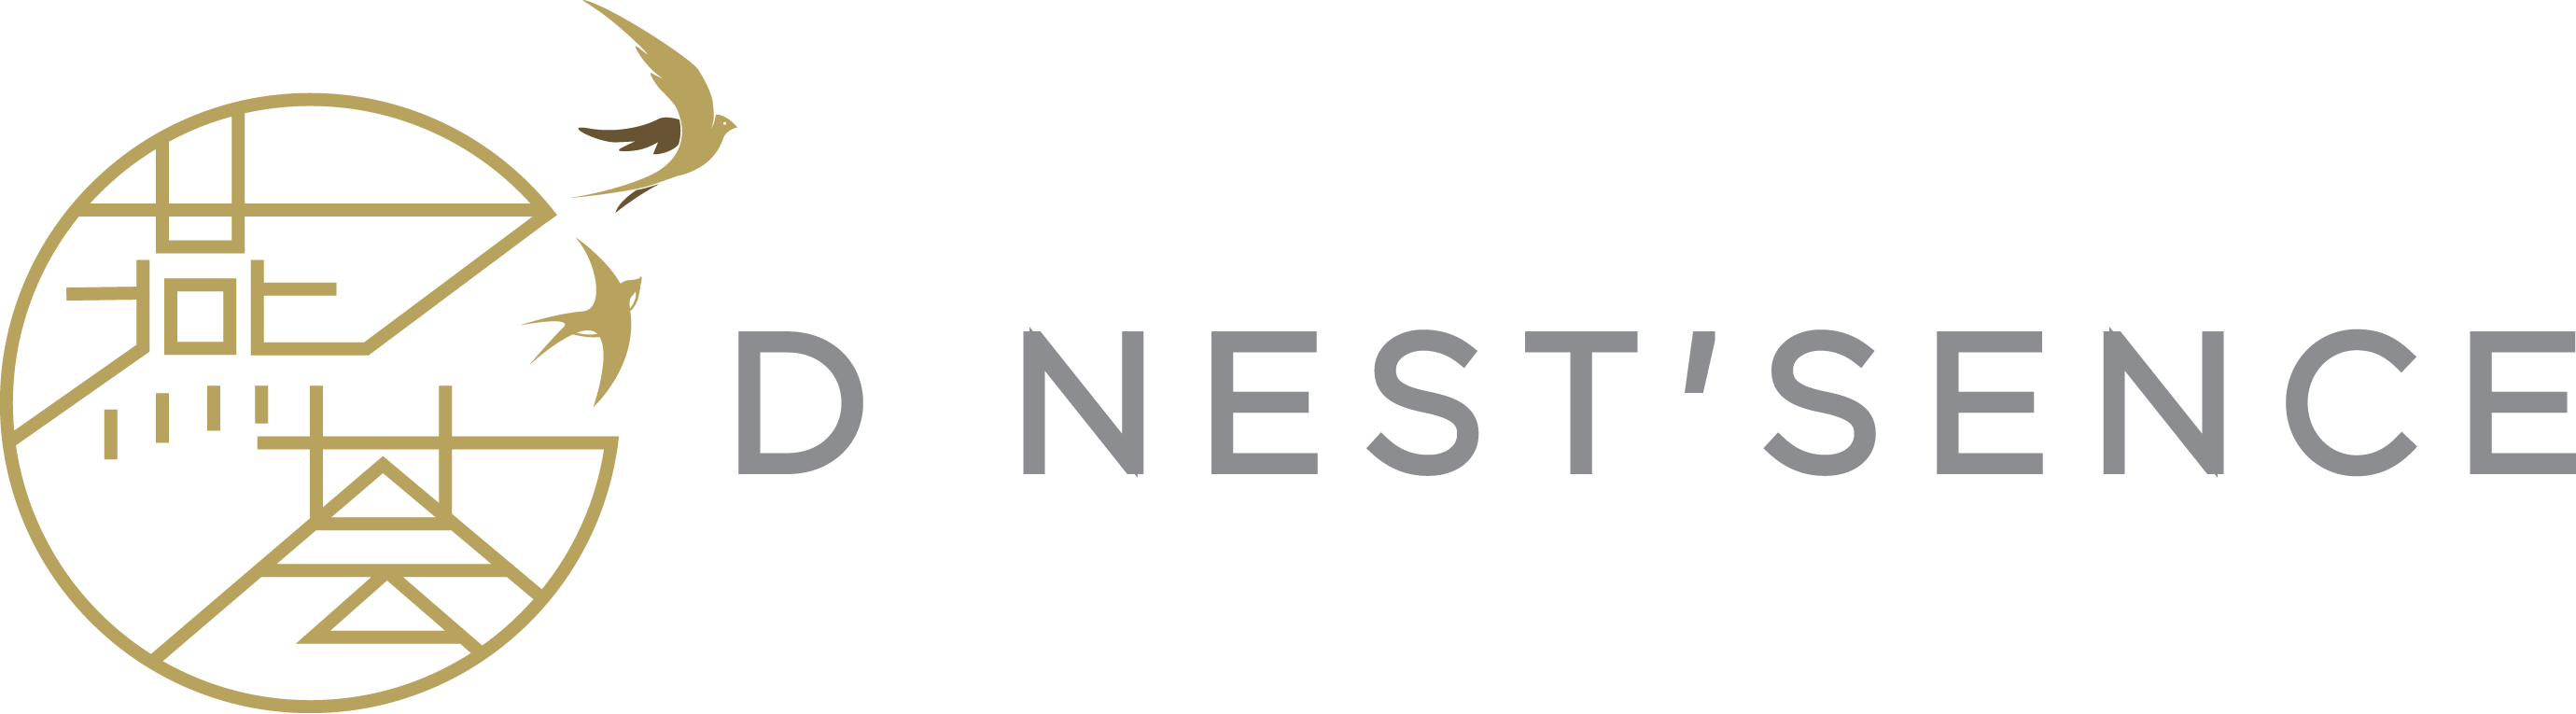 D Nestsence Sdn Bhd <br/>
Formerly known as Medestin Sdn Bhd)
202101021588(1421888-H)
We create the largest digital marketing plaform for freshly stewed birdnest in Malaysia! Make natural nourishment more eaiser! Our vision is to become the preferred brand of fresh stewed birdnest users in Malaysia, so that everyone can eat 